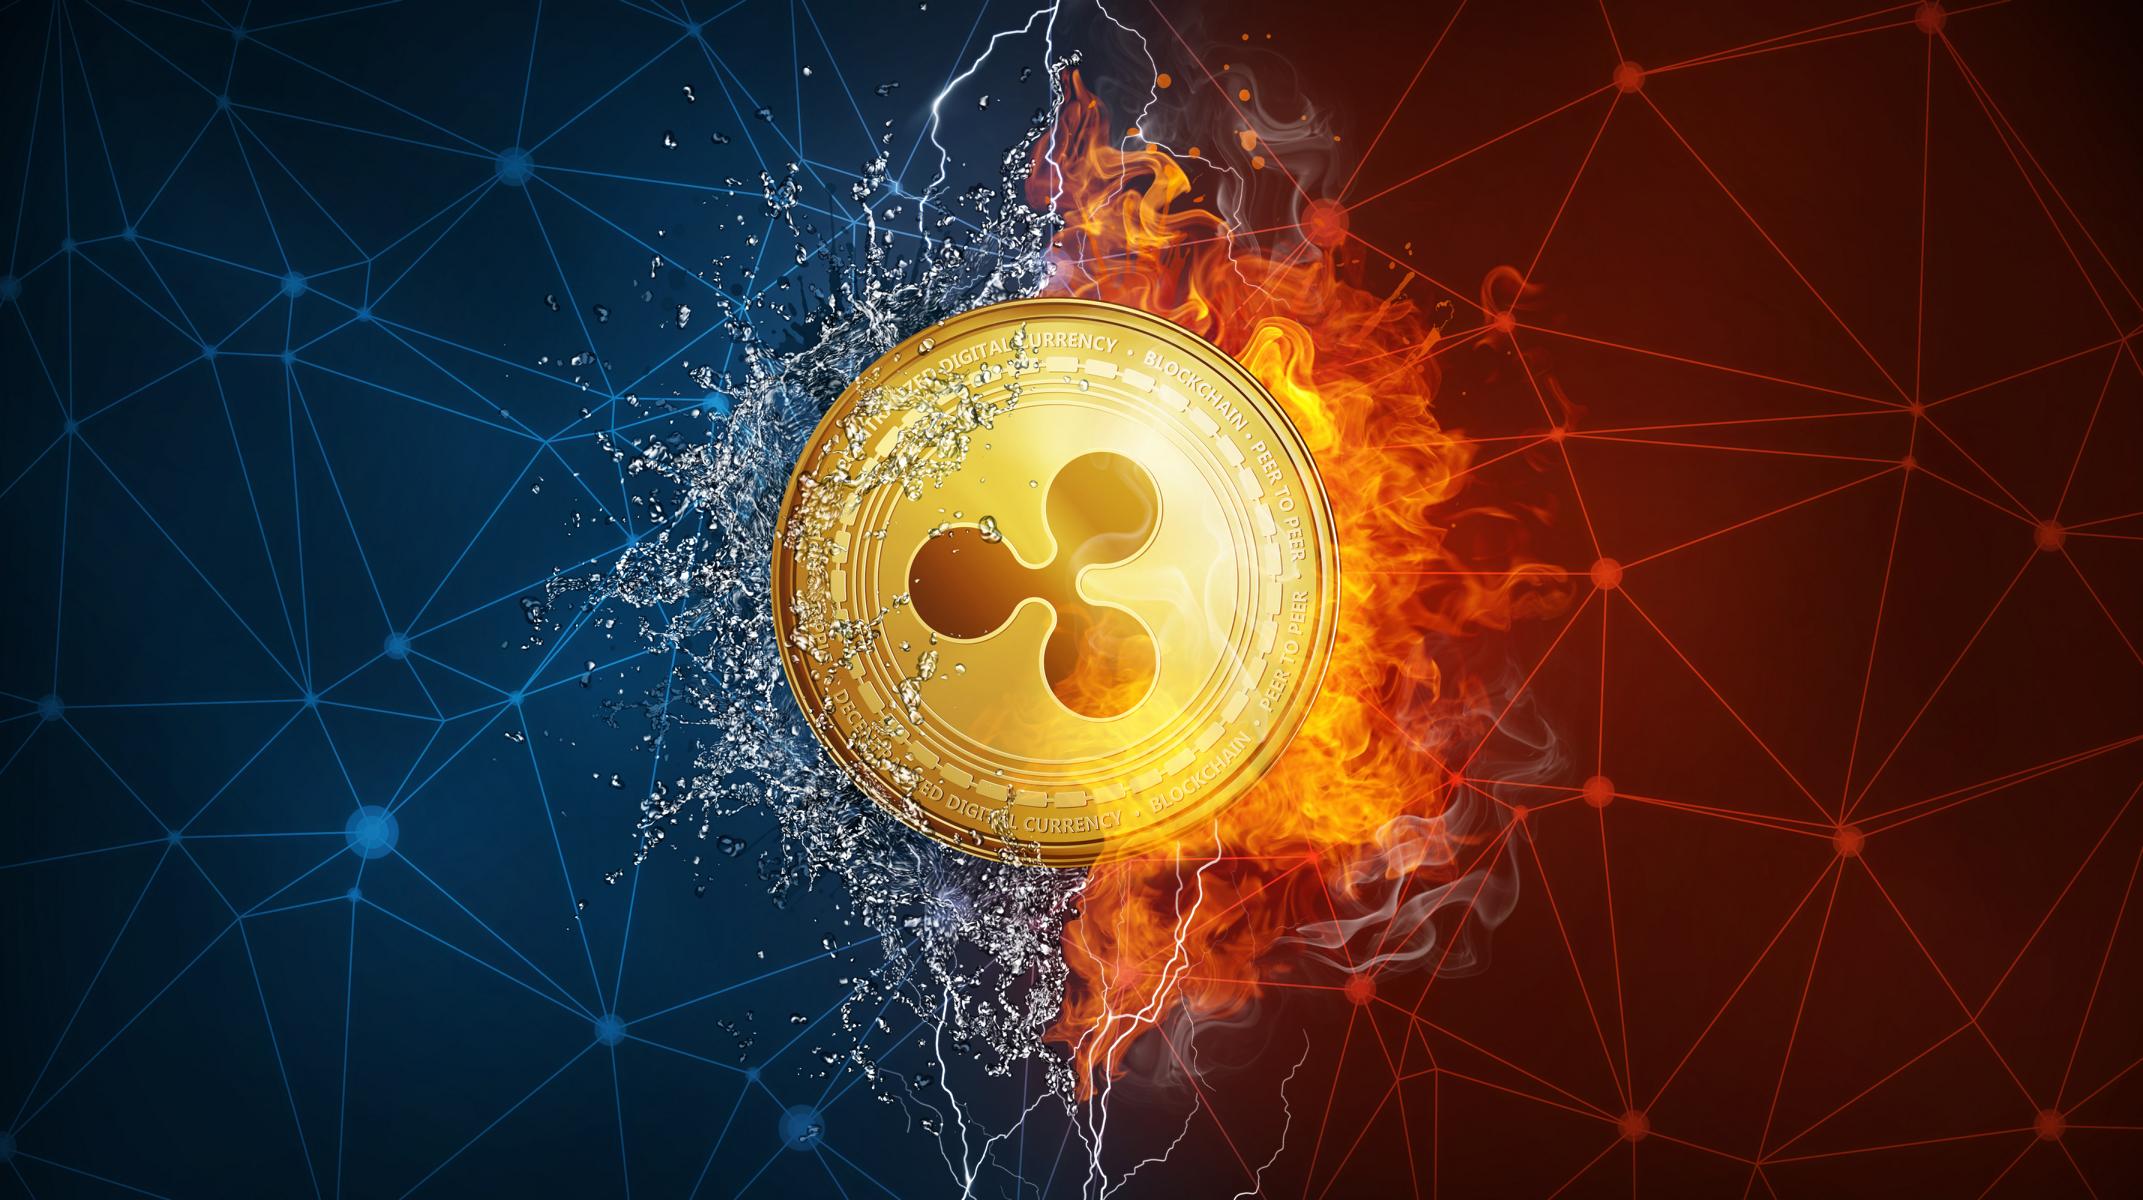 Ripple’s XRP Ledger Surges After Game-Changing Software Upgrade